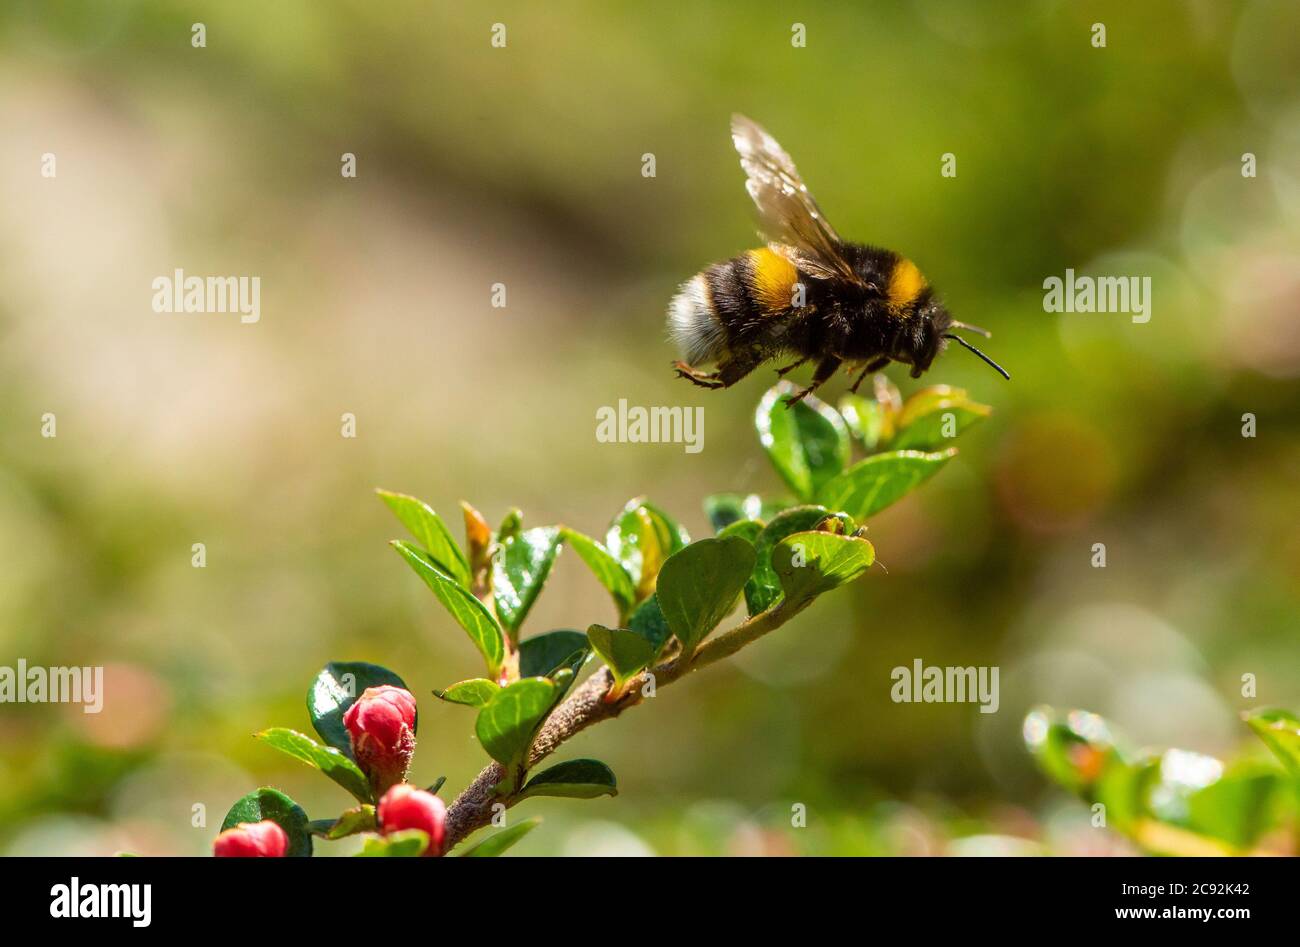 A White-tailed bumblebee on Cotoneaster flowers, Chipping, Preston, Lancashire. Stock Photo